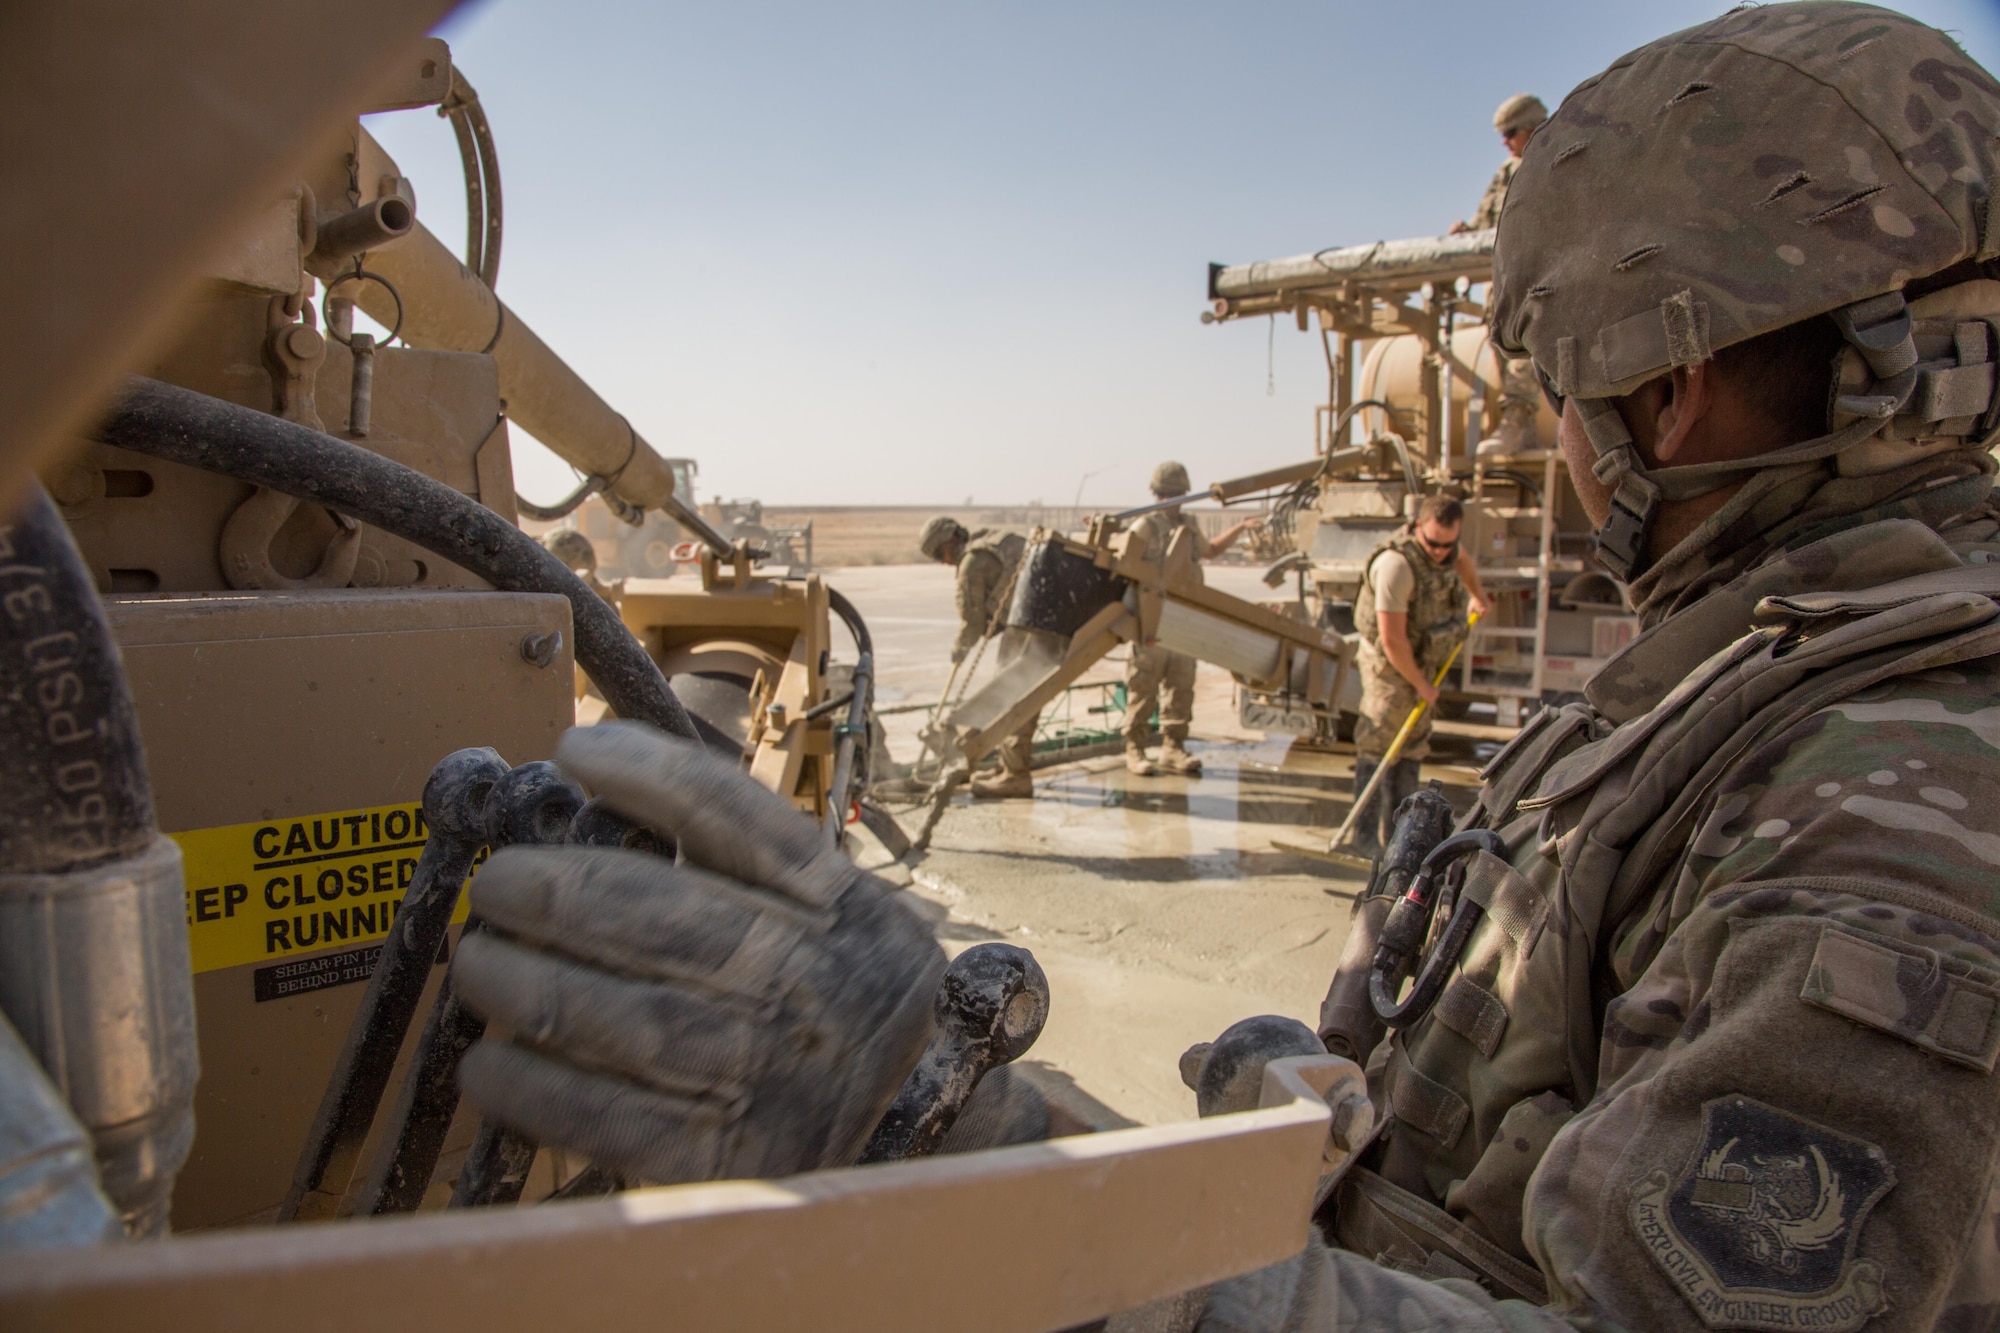 A U.S. Airman assigned to the 1st Expeditionary Civil Engineering Group operates a volumetric mixer during runway repair operations at Qayyarah West airfield, Iraq, Oct.9, 2016. 1st ECEG has been tasked with repairing the runway after the Islamic State of Iraq and the Levant (ISIL) destroyed it by using heavy machinery and explosives to disrupt Coalition forces from gaining control in the area. A Coalition of regional and international nations have joined together to enable Iraqi forces to counter ISIL, reestablish Iraq’s borders and re-take lost terrain thereby restoring regional stability and security.  (U.S. Army photo by Spc. Christopher Brecht)